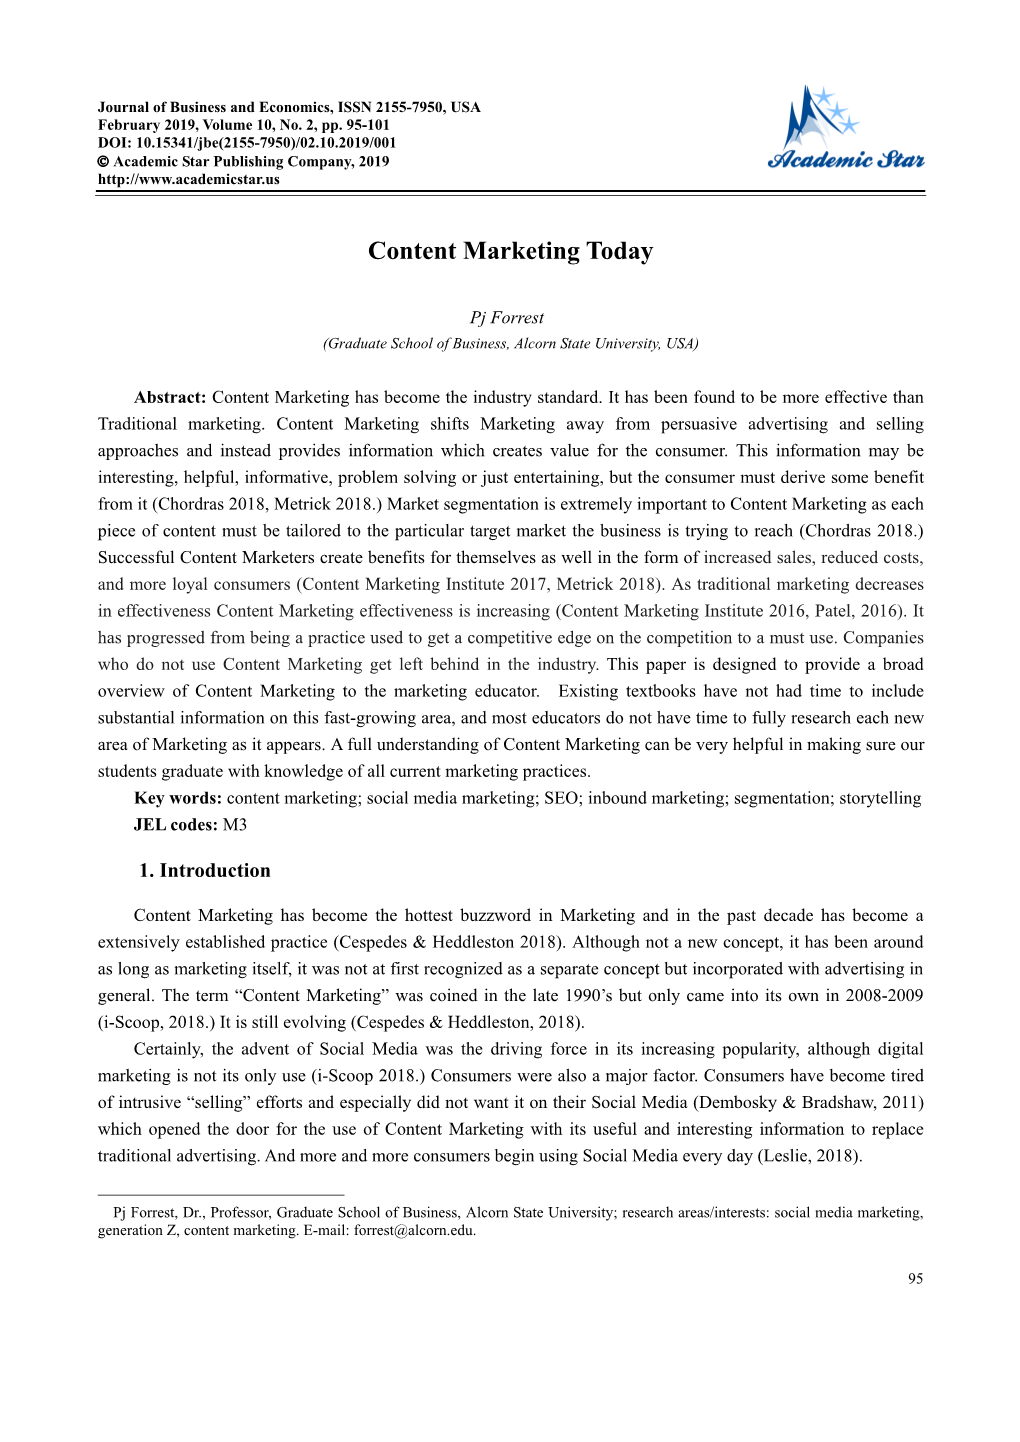 Content Marketing Today